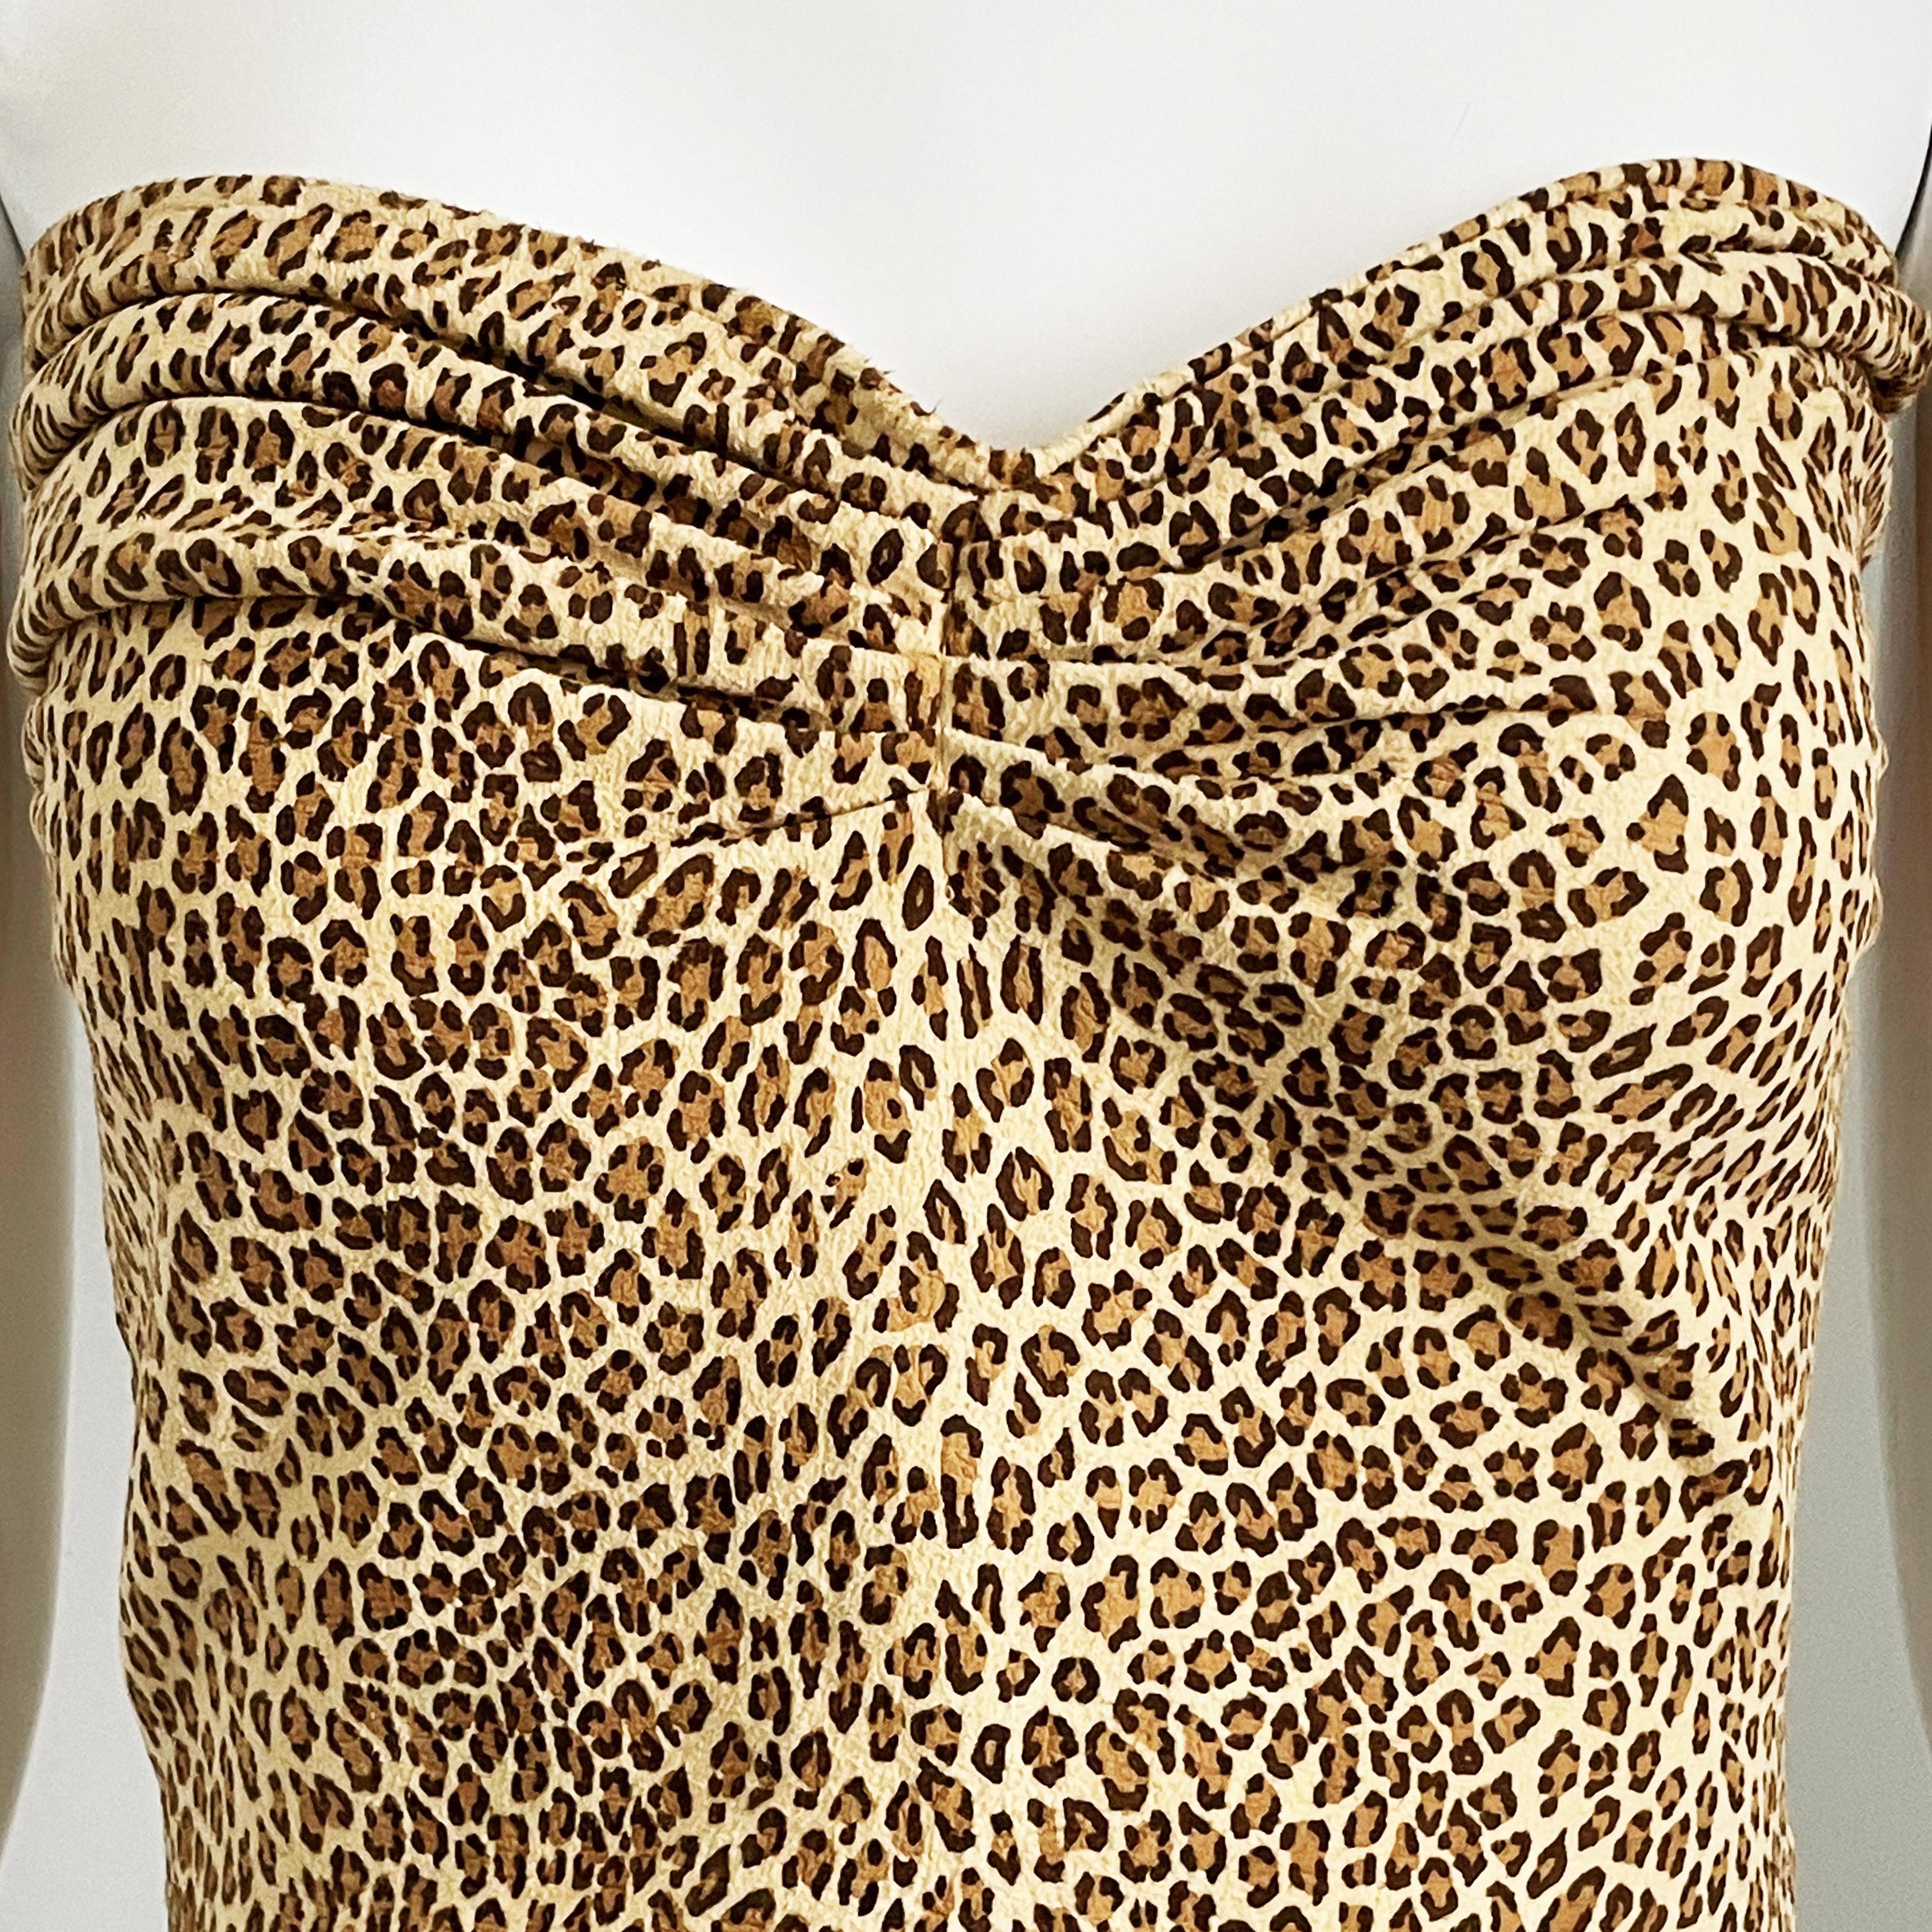 Women's or Men's Norma Kamali OMO Leather Corset Top with Wrap Ties Leopard Print Vintage HTF For Sale